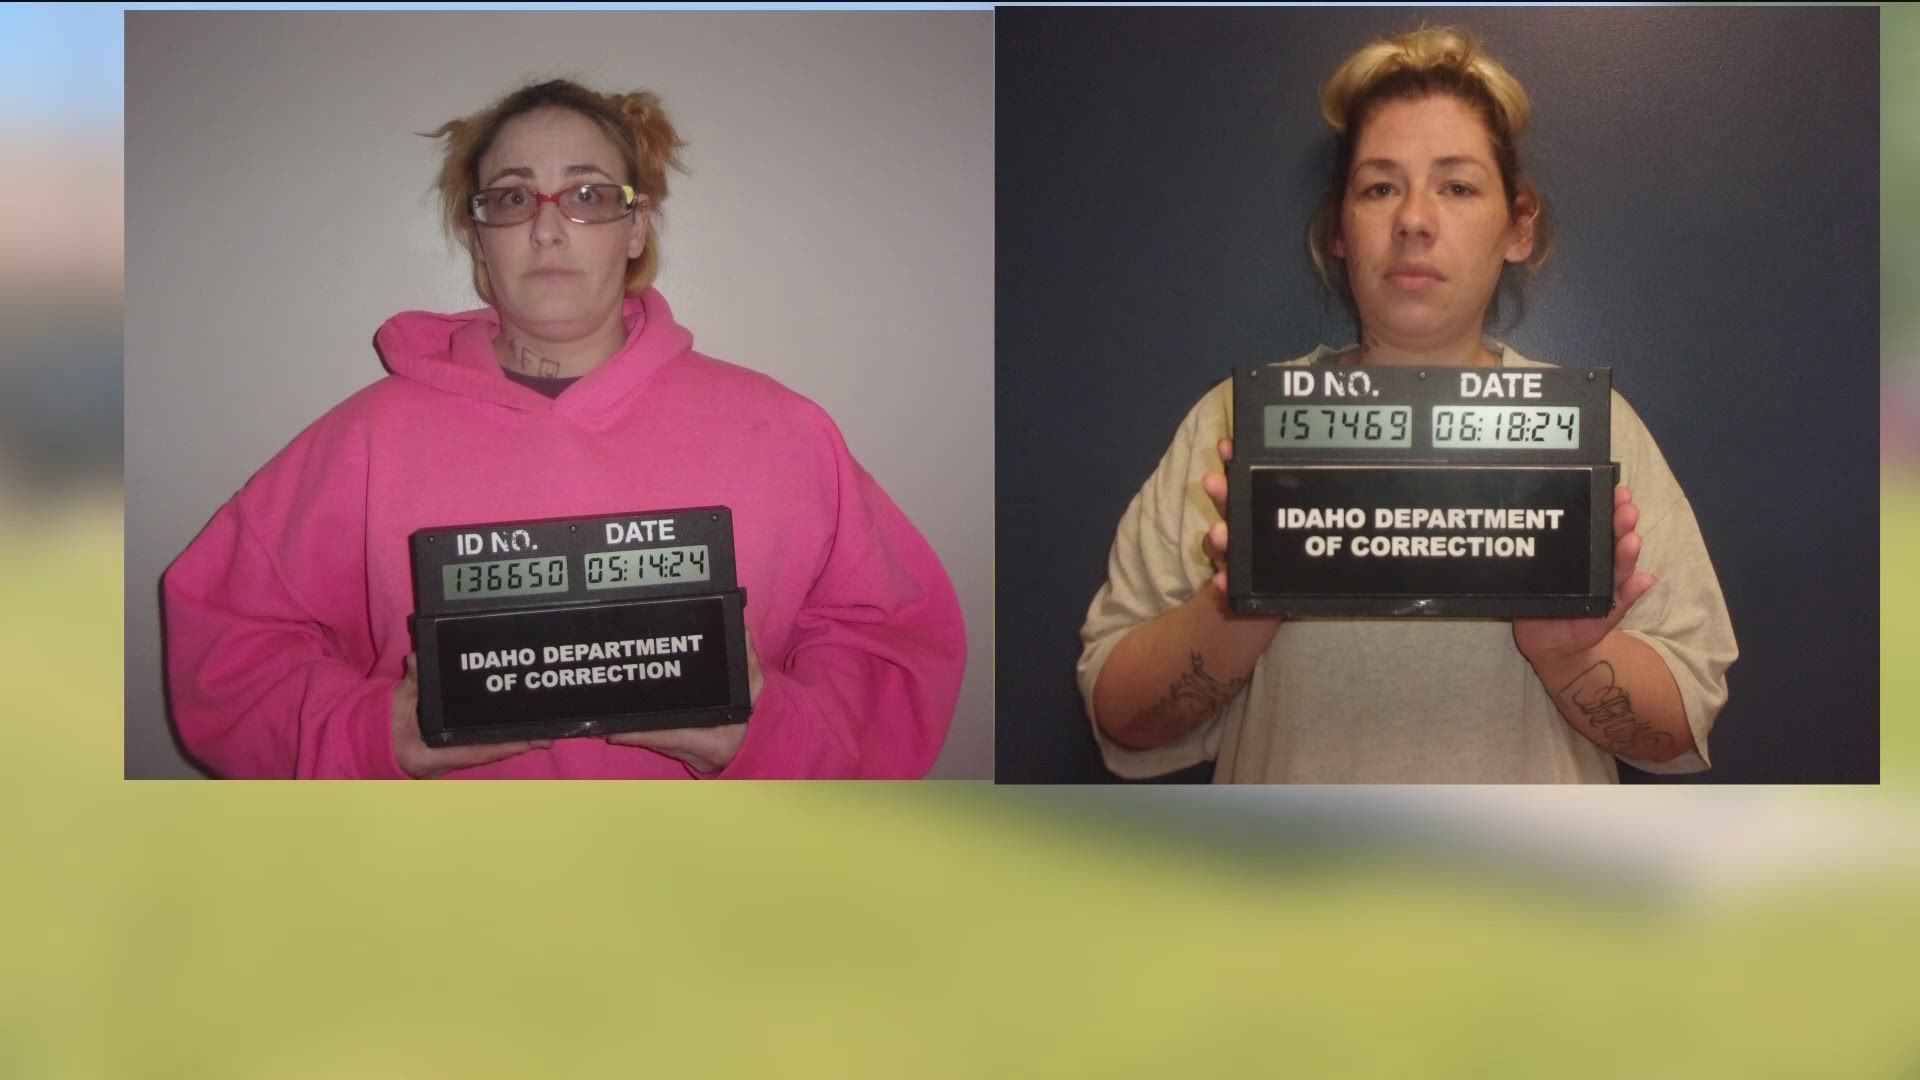 The Idaho Department of Correction said Sarah Zumwalt and Katy Buchanan were last on prison property at roughly 8:45 p.m. Sunday, June 30.